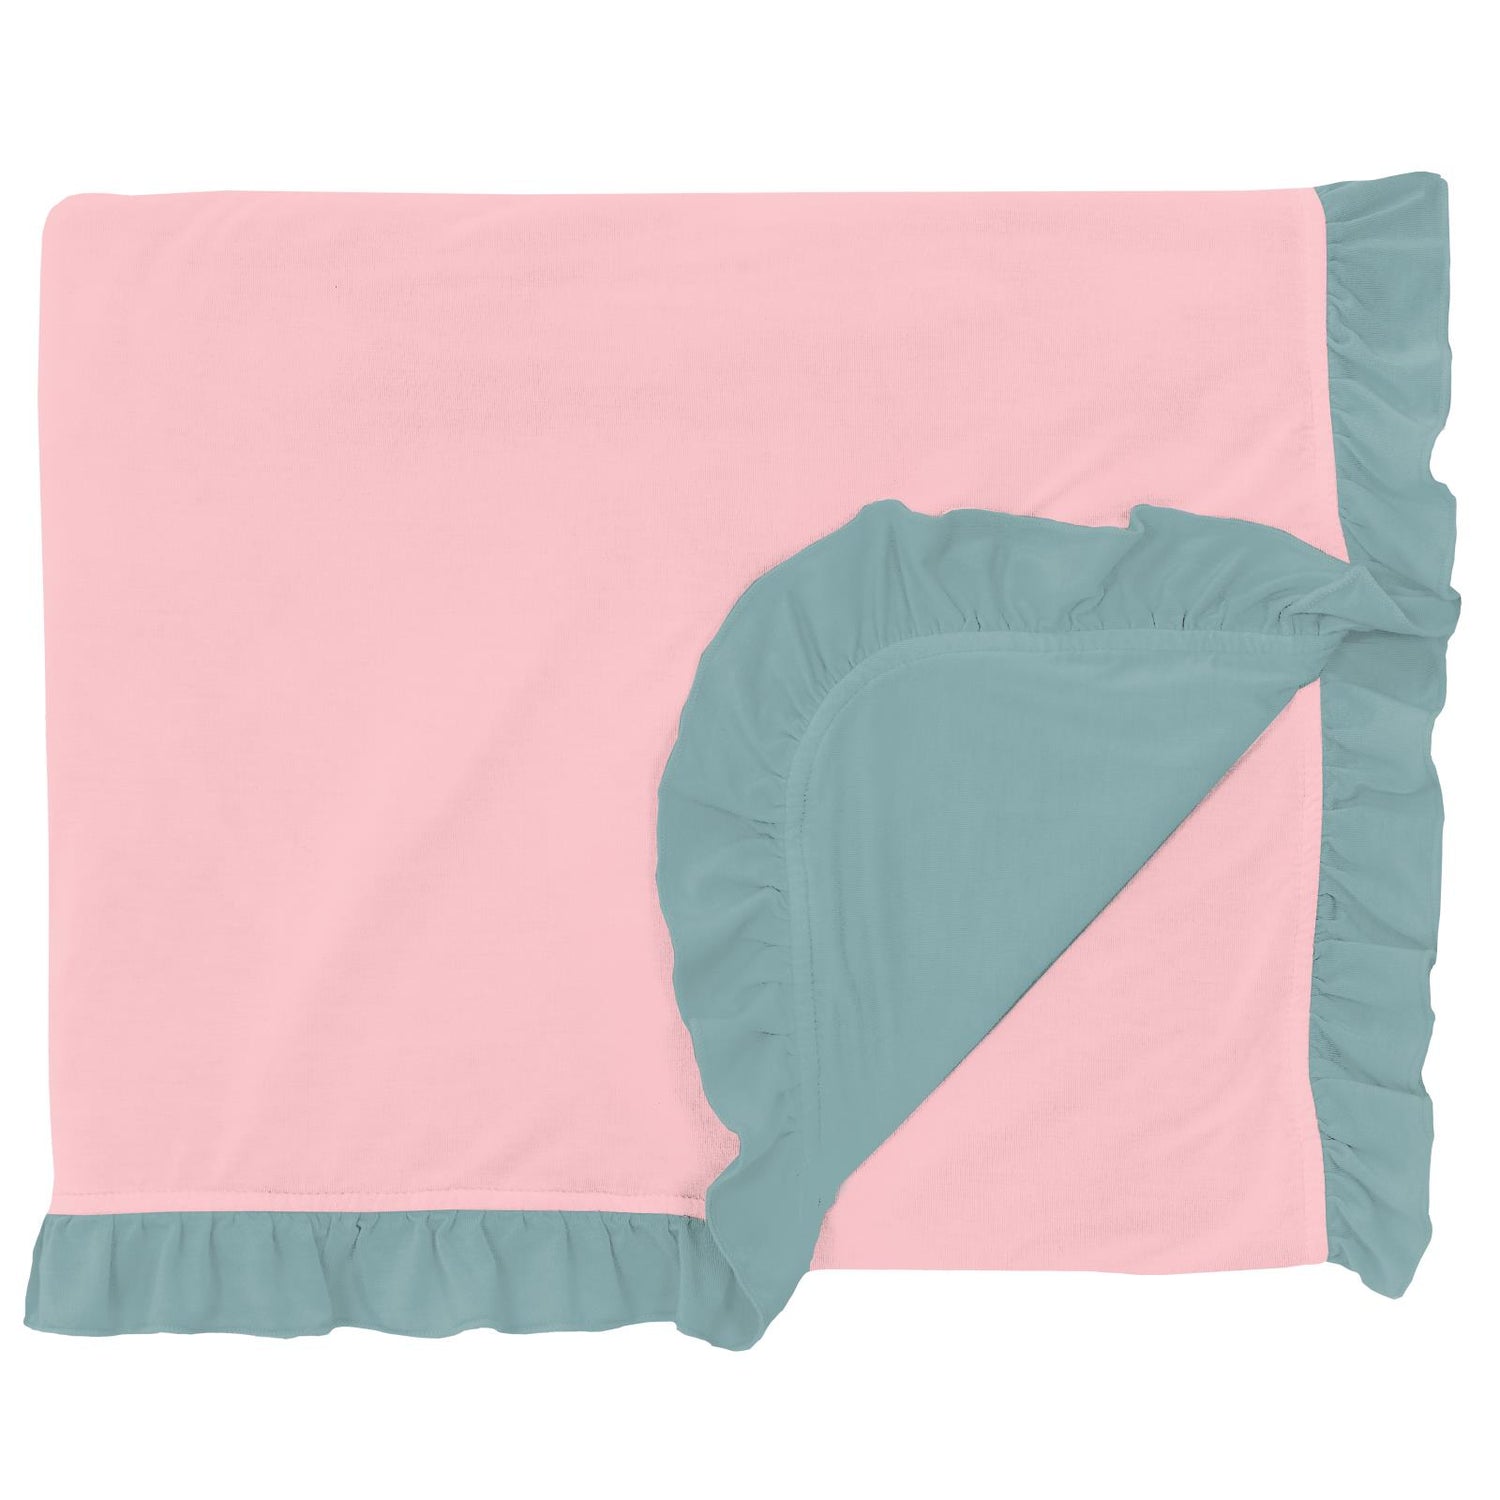 Ruffle Double Layer Throw Blanket in Lotus with Jade